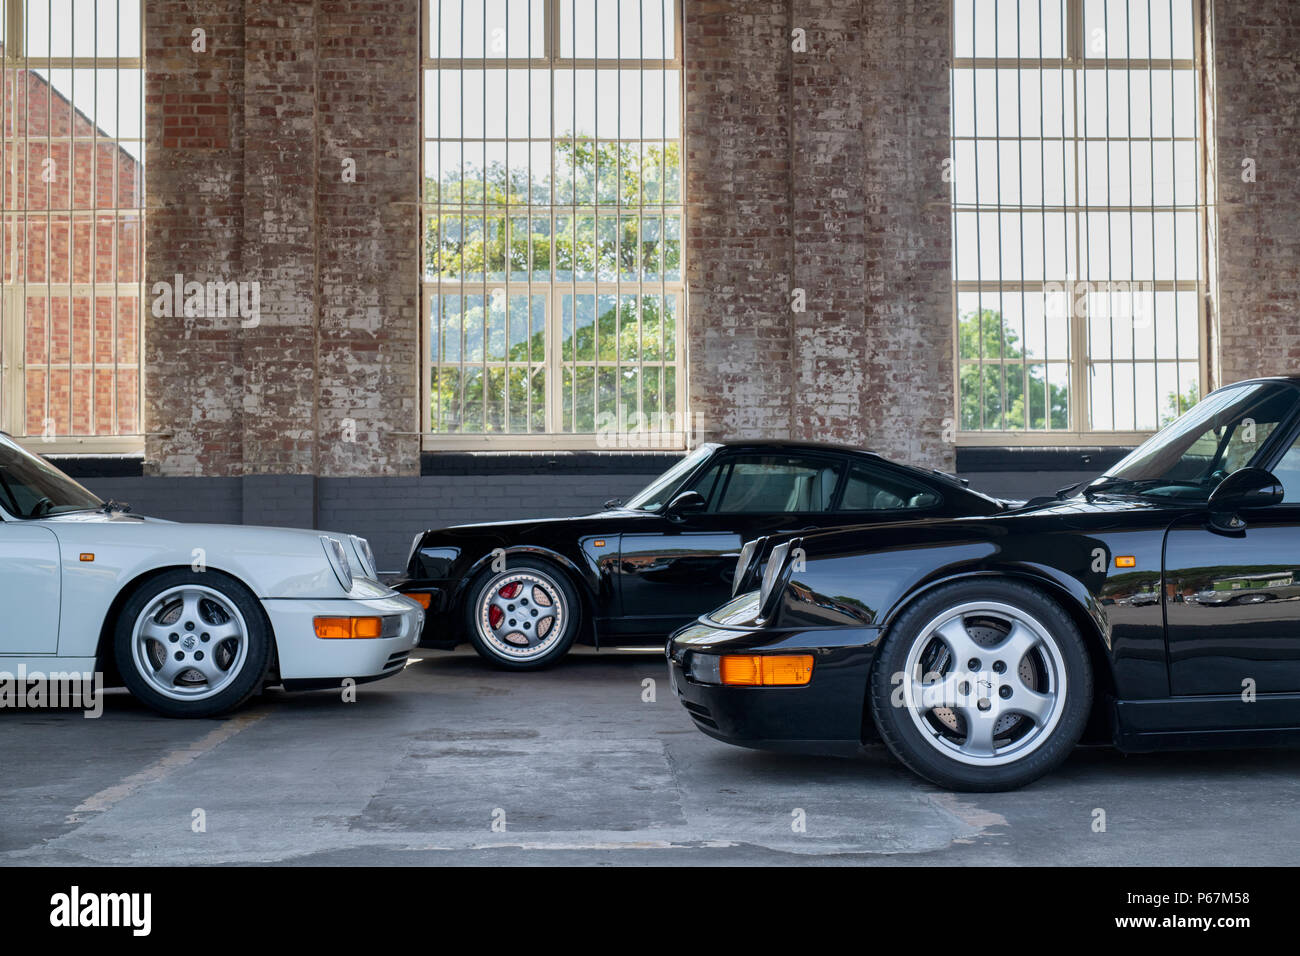 Porsche cars in garage at Bicester heritage centre. Bicester, Oxfordshire, England Stock Photo